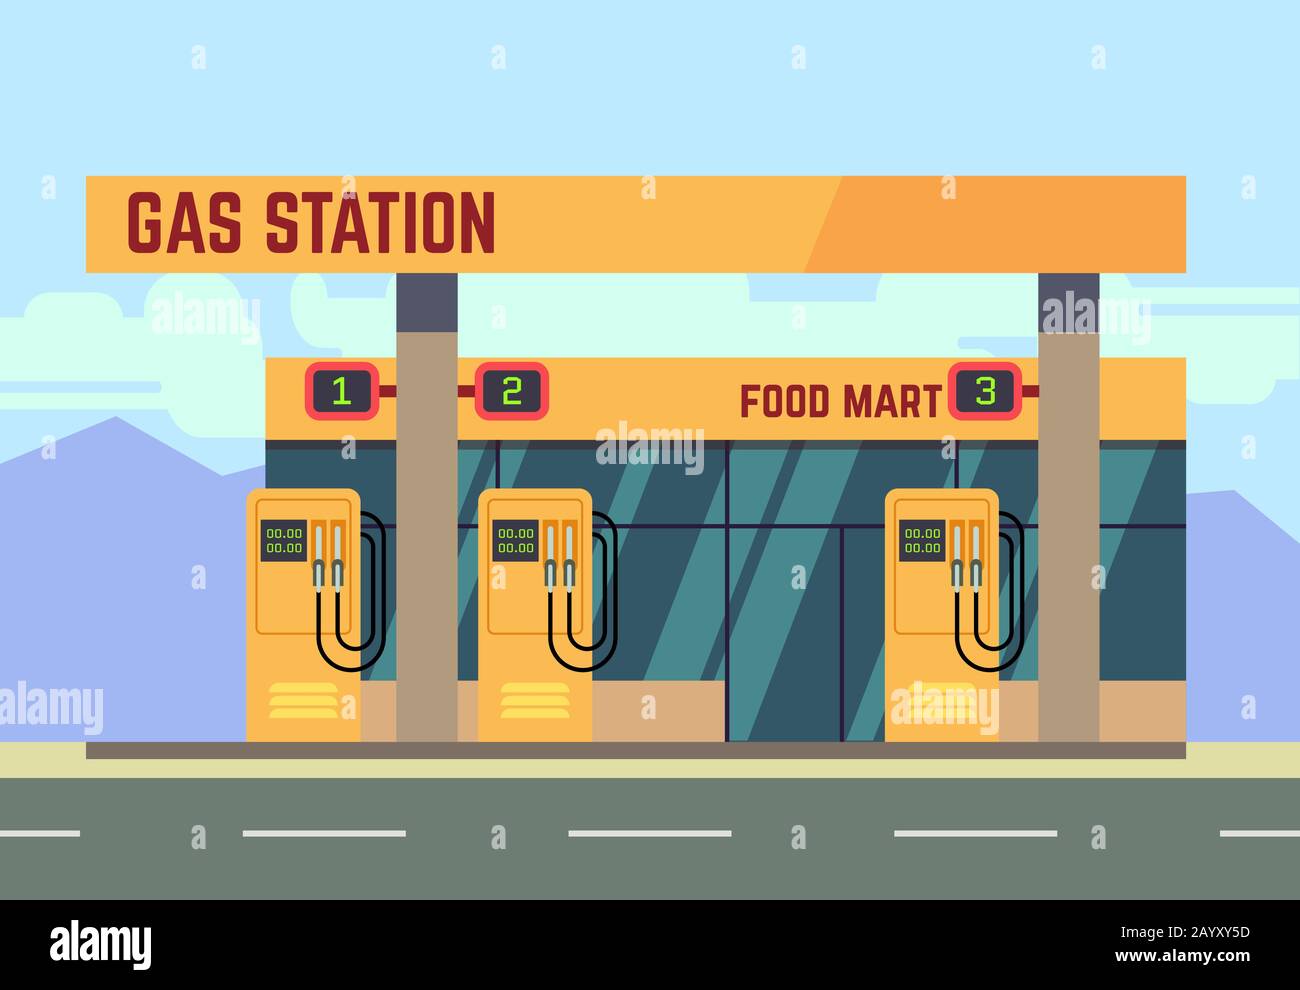 Gas filling station transport related service. Empty gas station on roadside, illustration of gas filling station with food shop Stock Vector